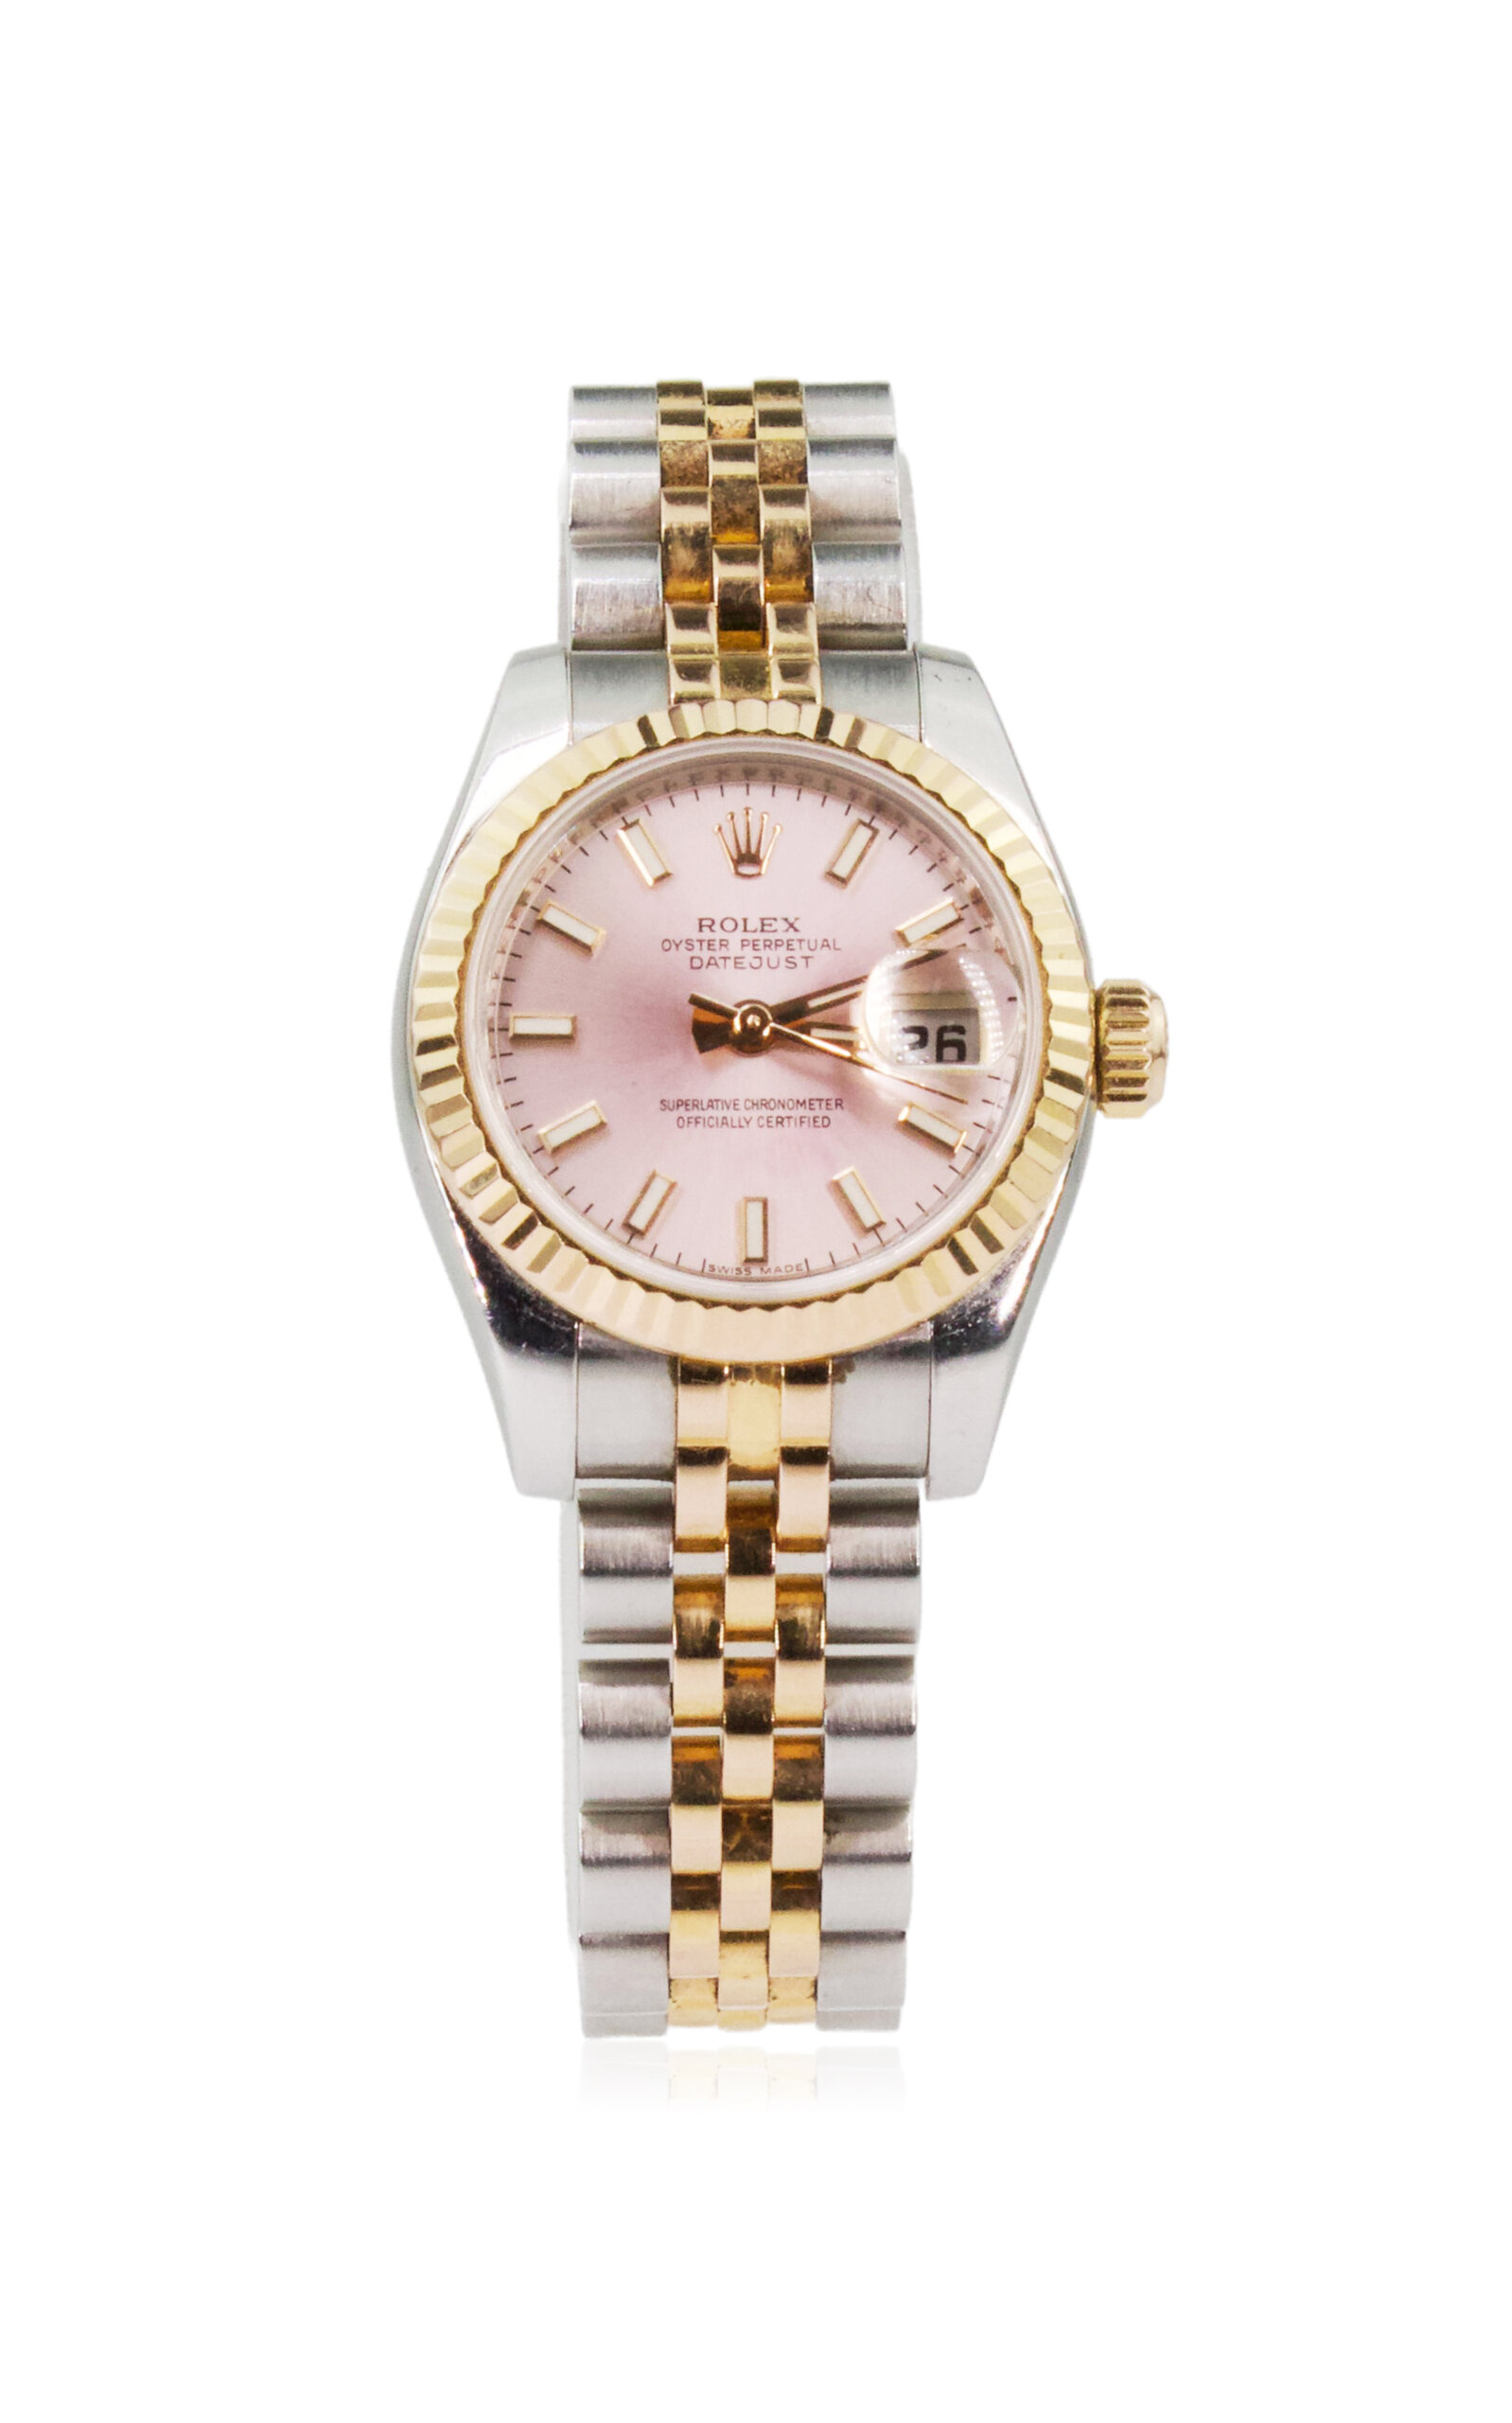 Private Label London Rolex Datejust Stainless Steel; 18k Rose Gold Watch In Pink